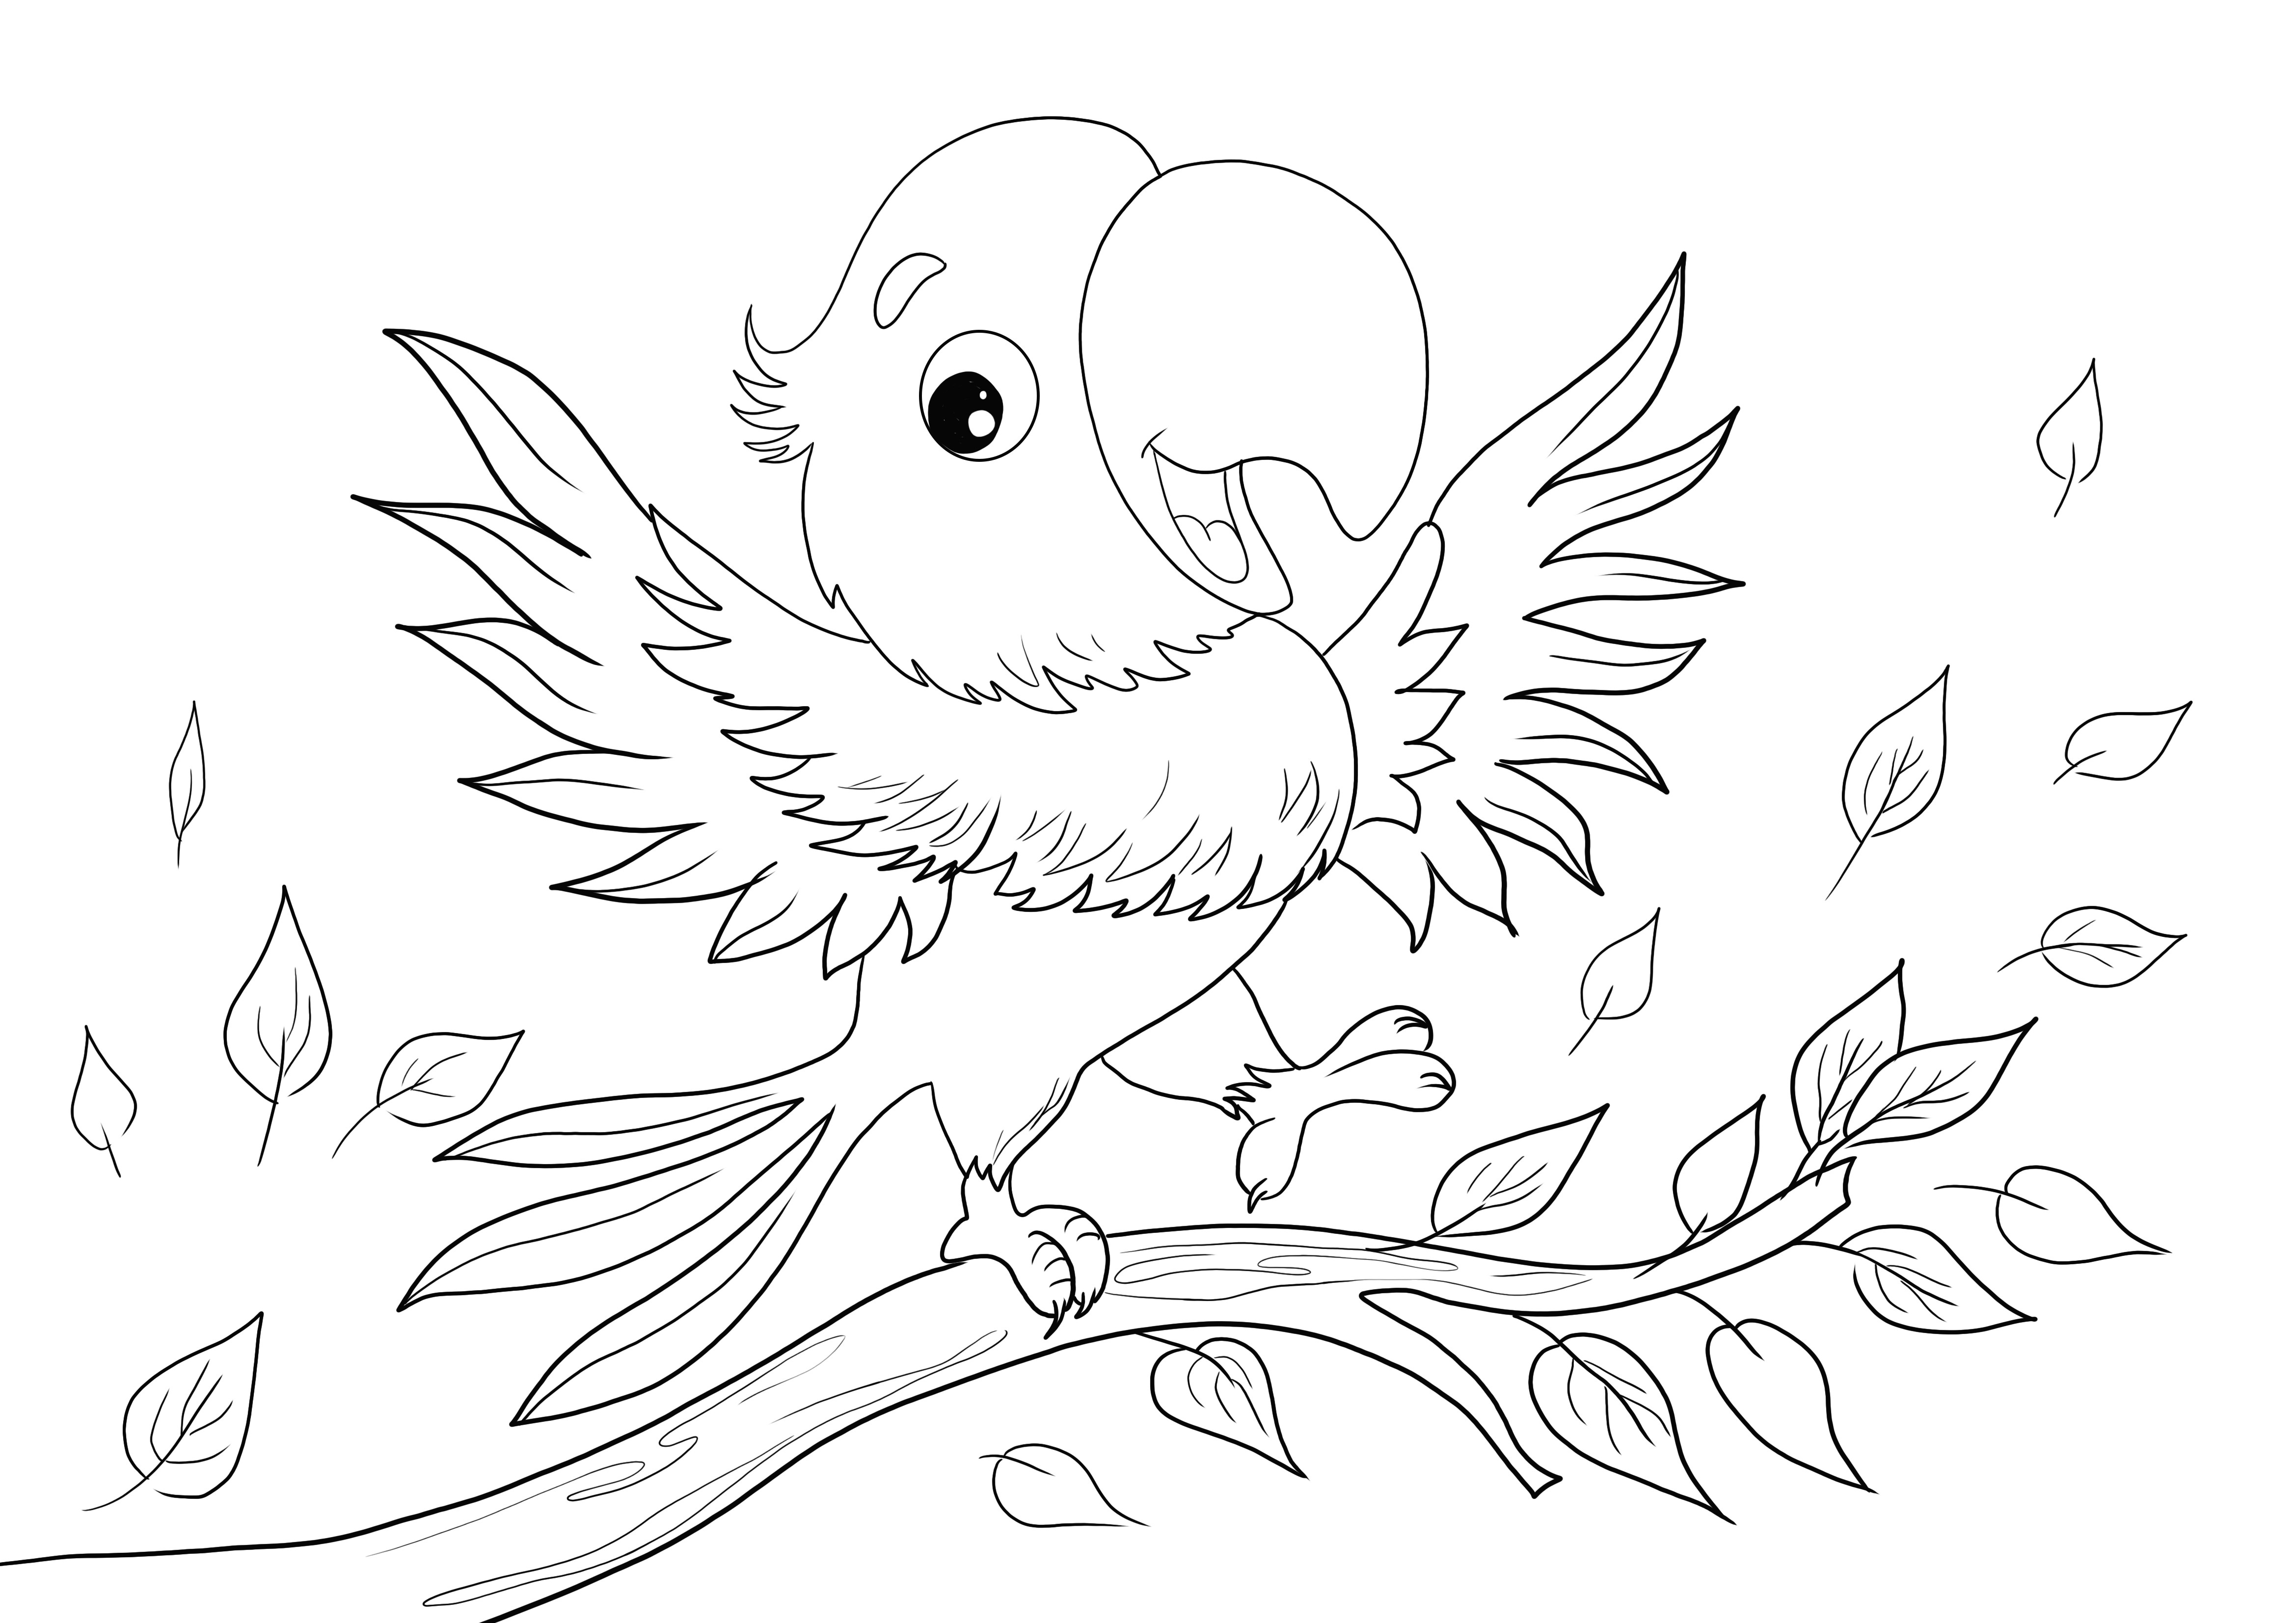 Parrot singing on a tree branch free printable for coloring sheet